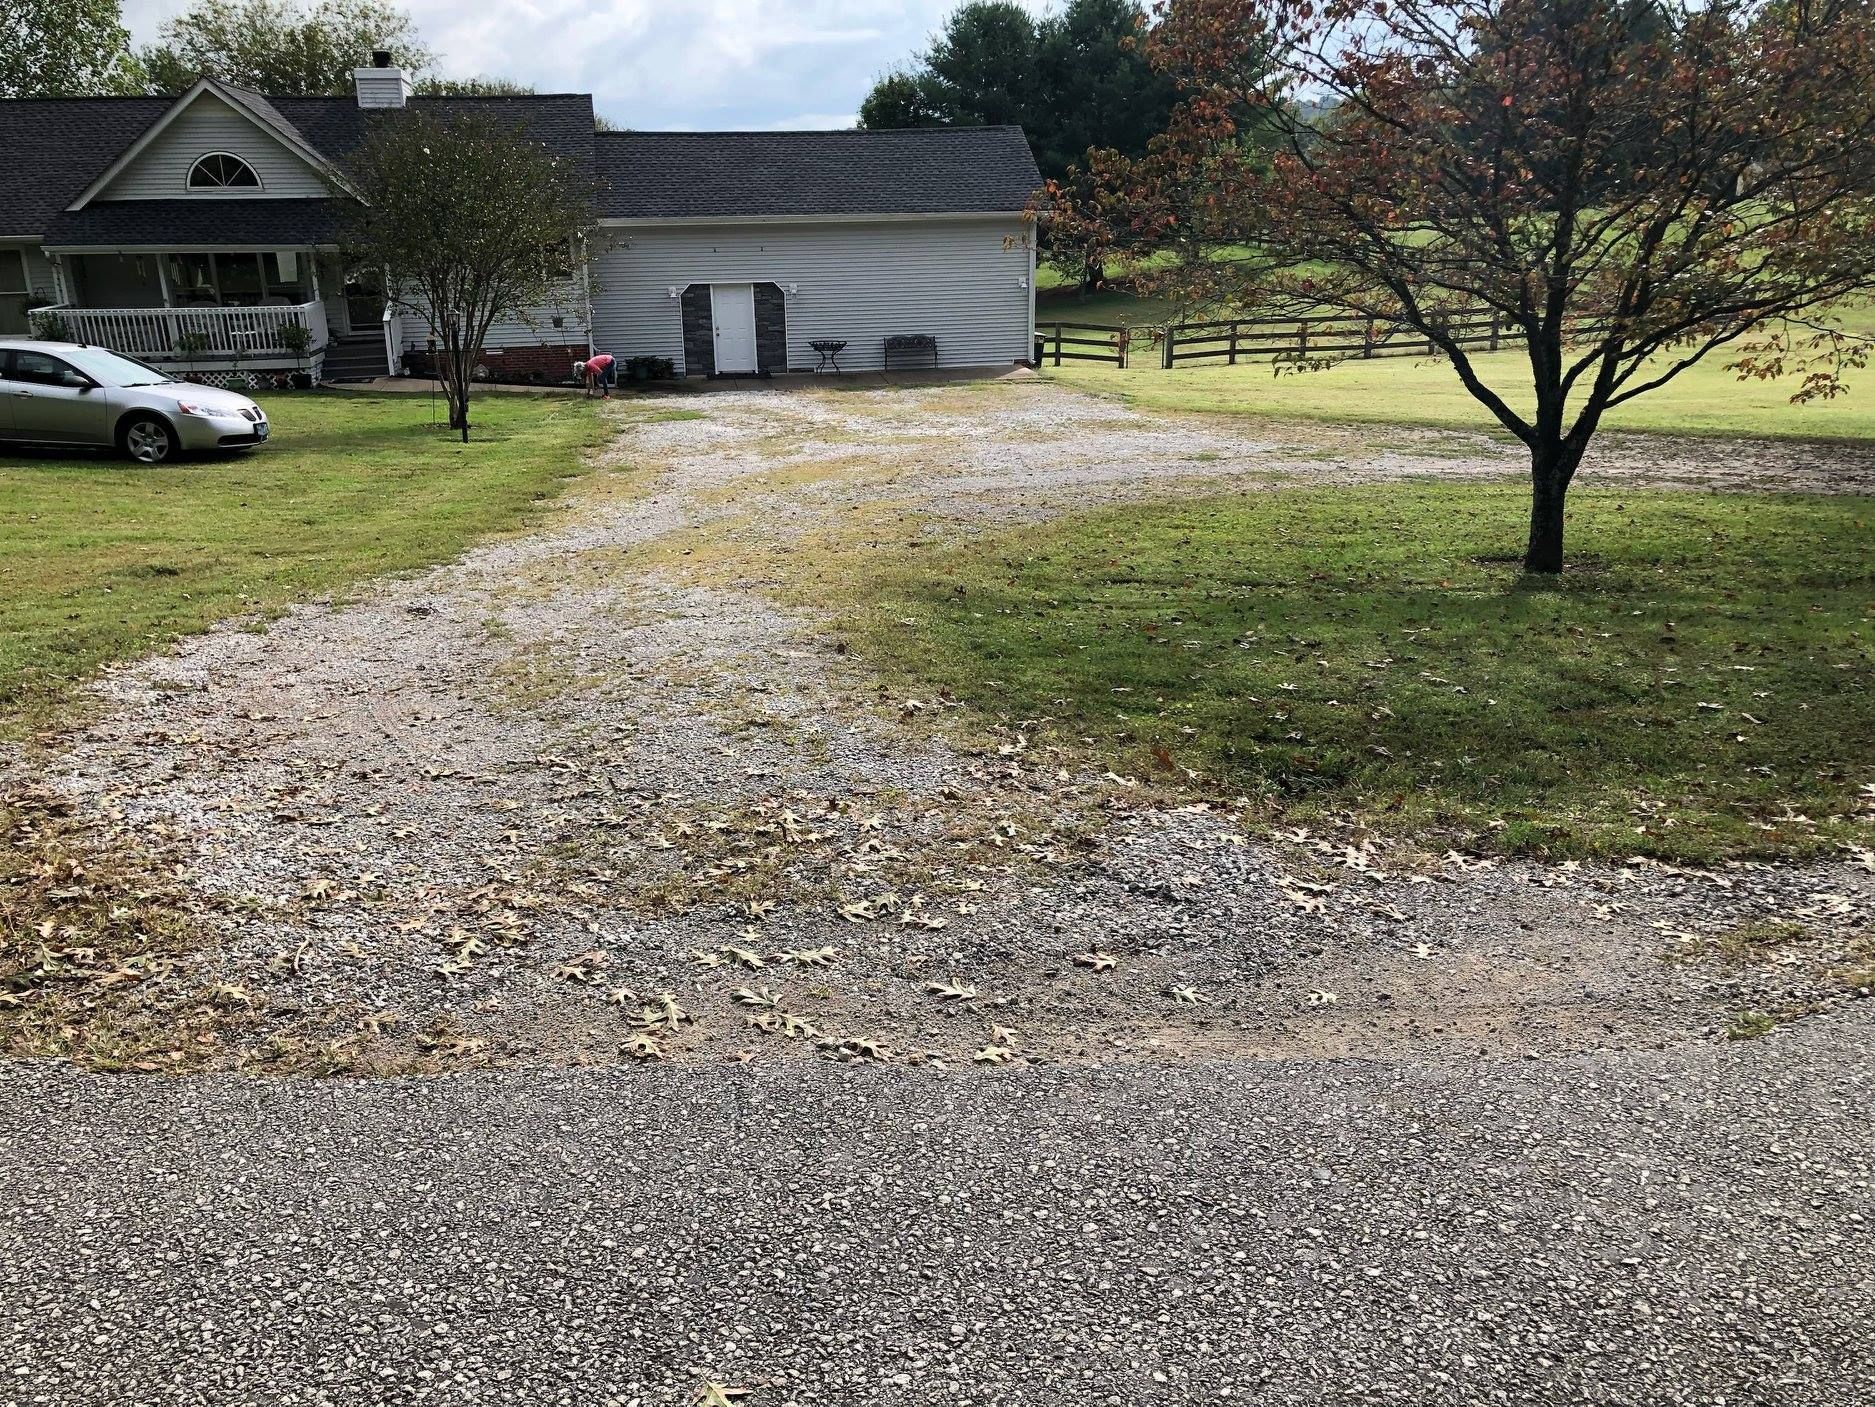 A gravel driveway leading to a house with a car parked in front of it.